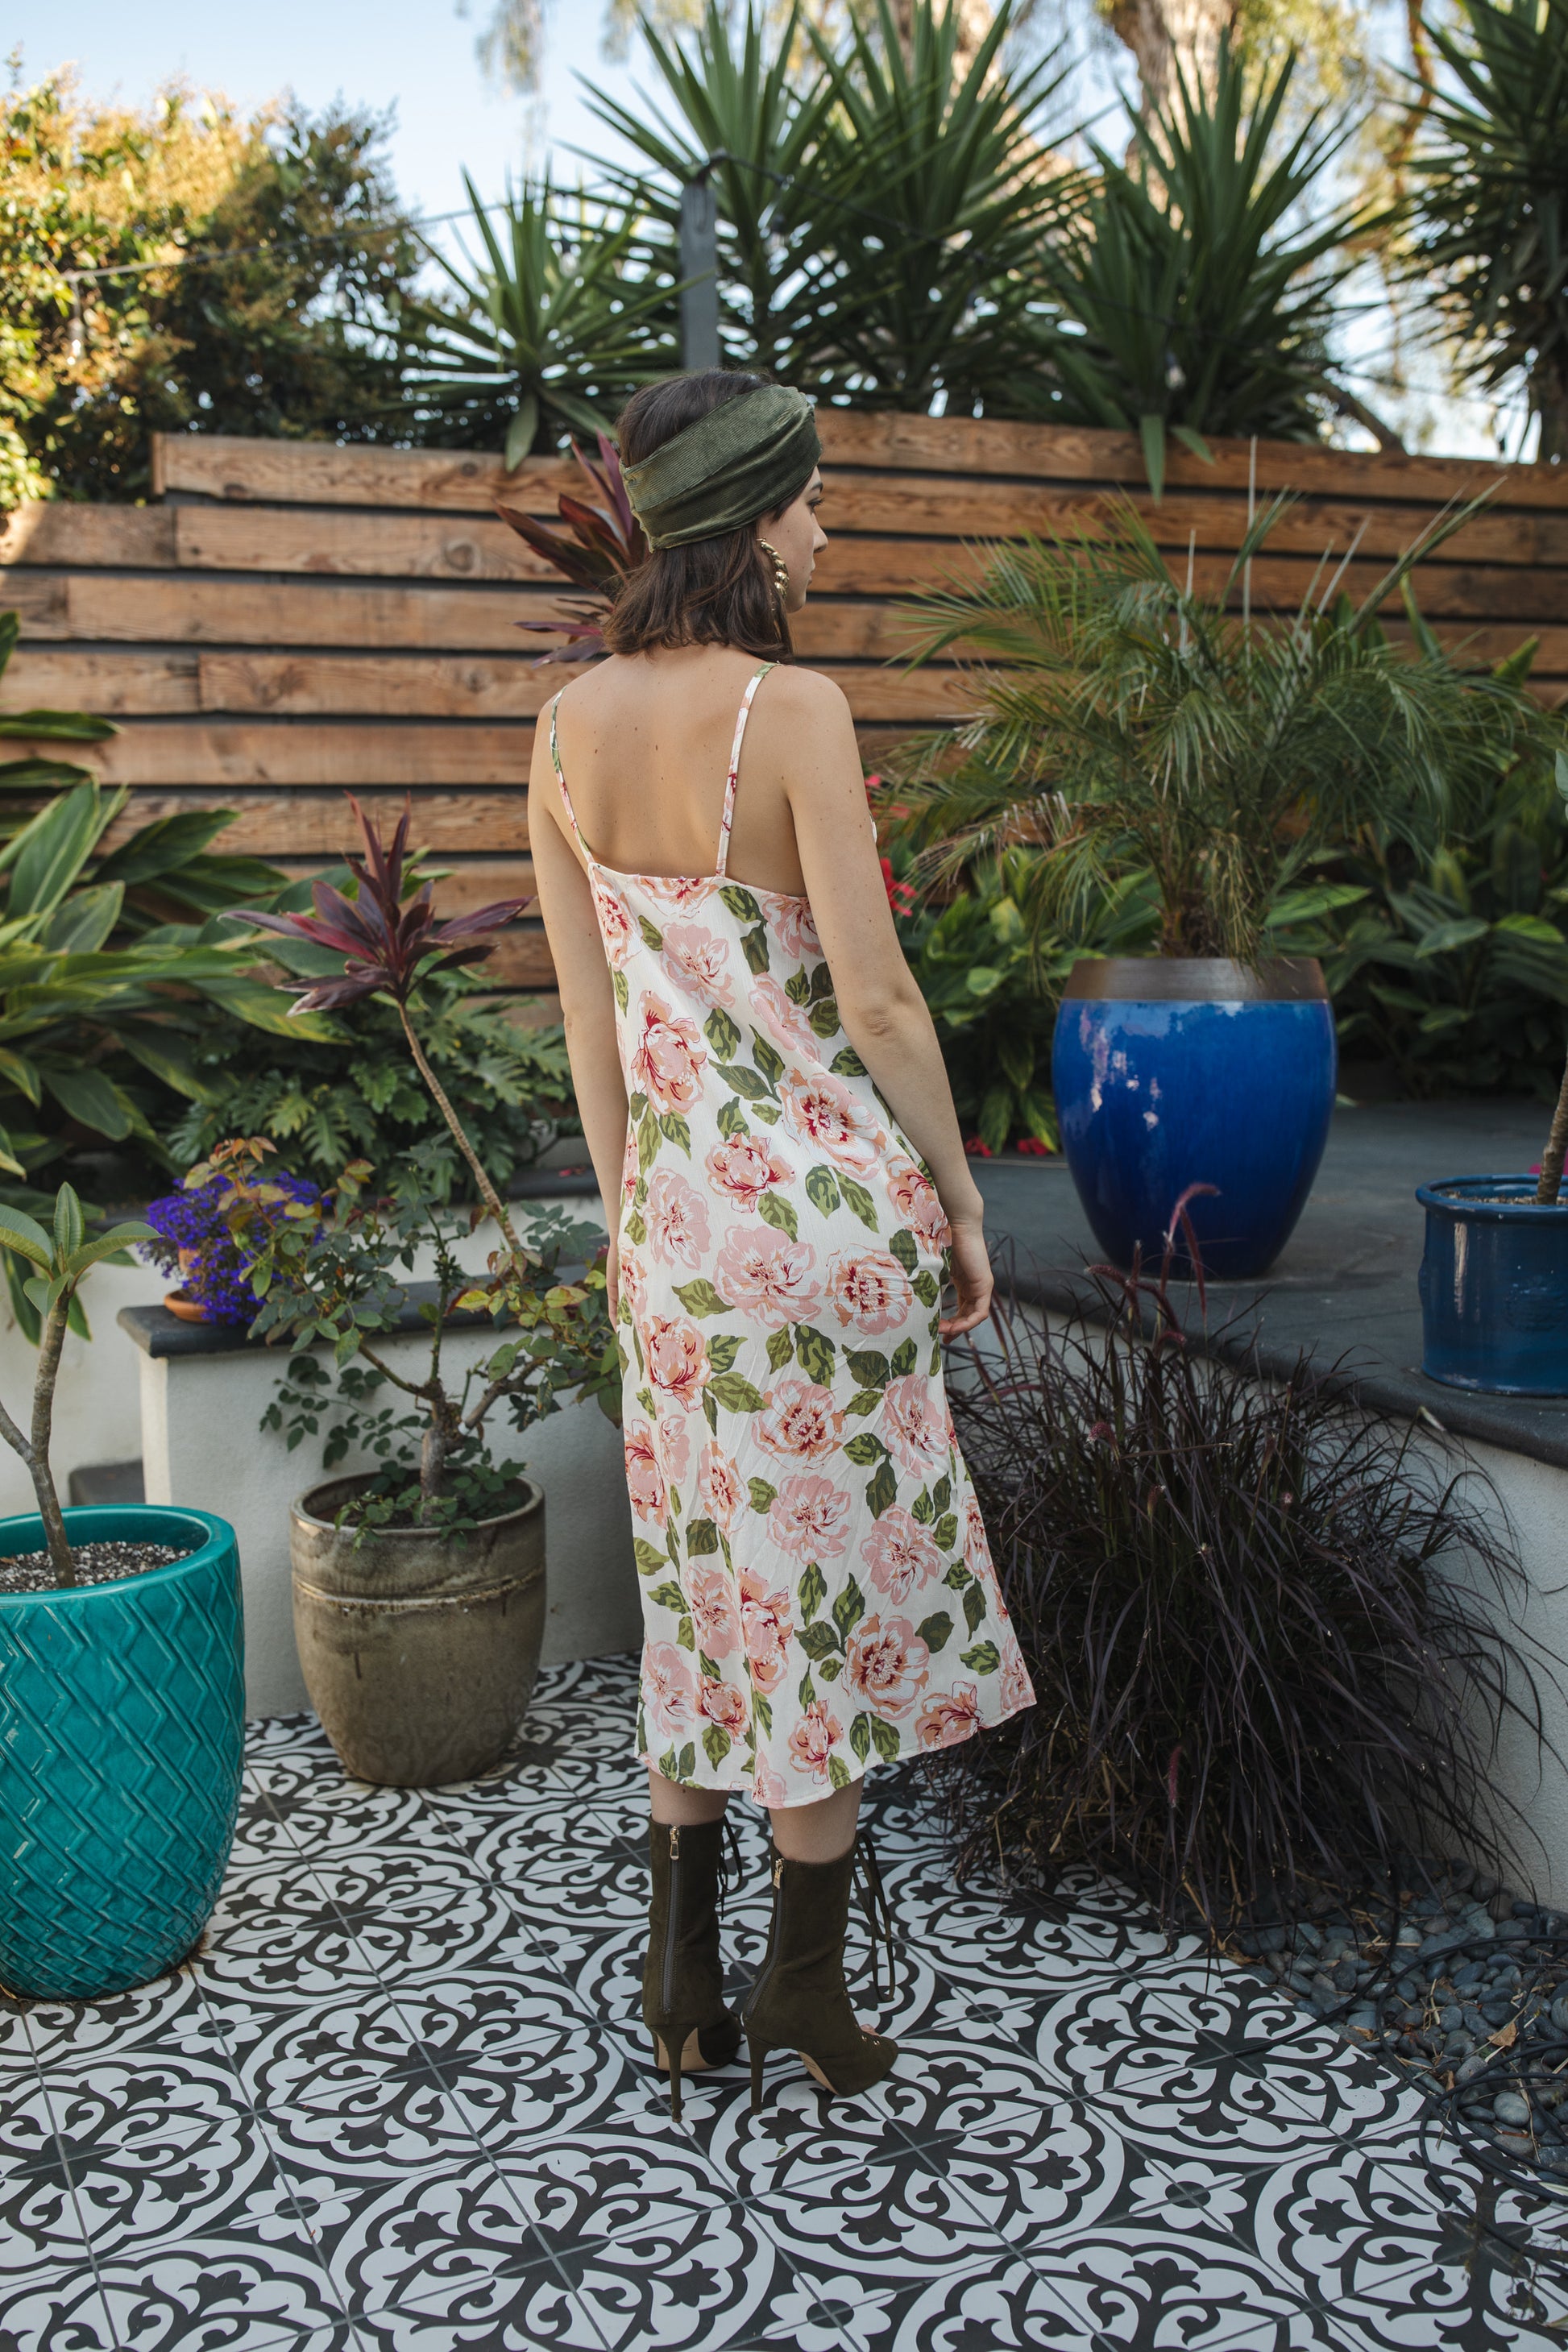 Midi slip dress with an ivory base color, adorned with floral rose print pattern featuring shades of green and pink. It features slender straps with a straight silhouette and relaxed fix, allowing for a beautiful drape and flowy movement. It's designed for a light, airy feel, suitable for warm weather or layered for cooler days.